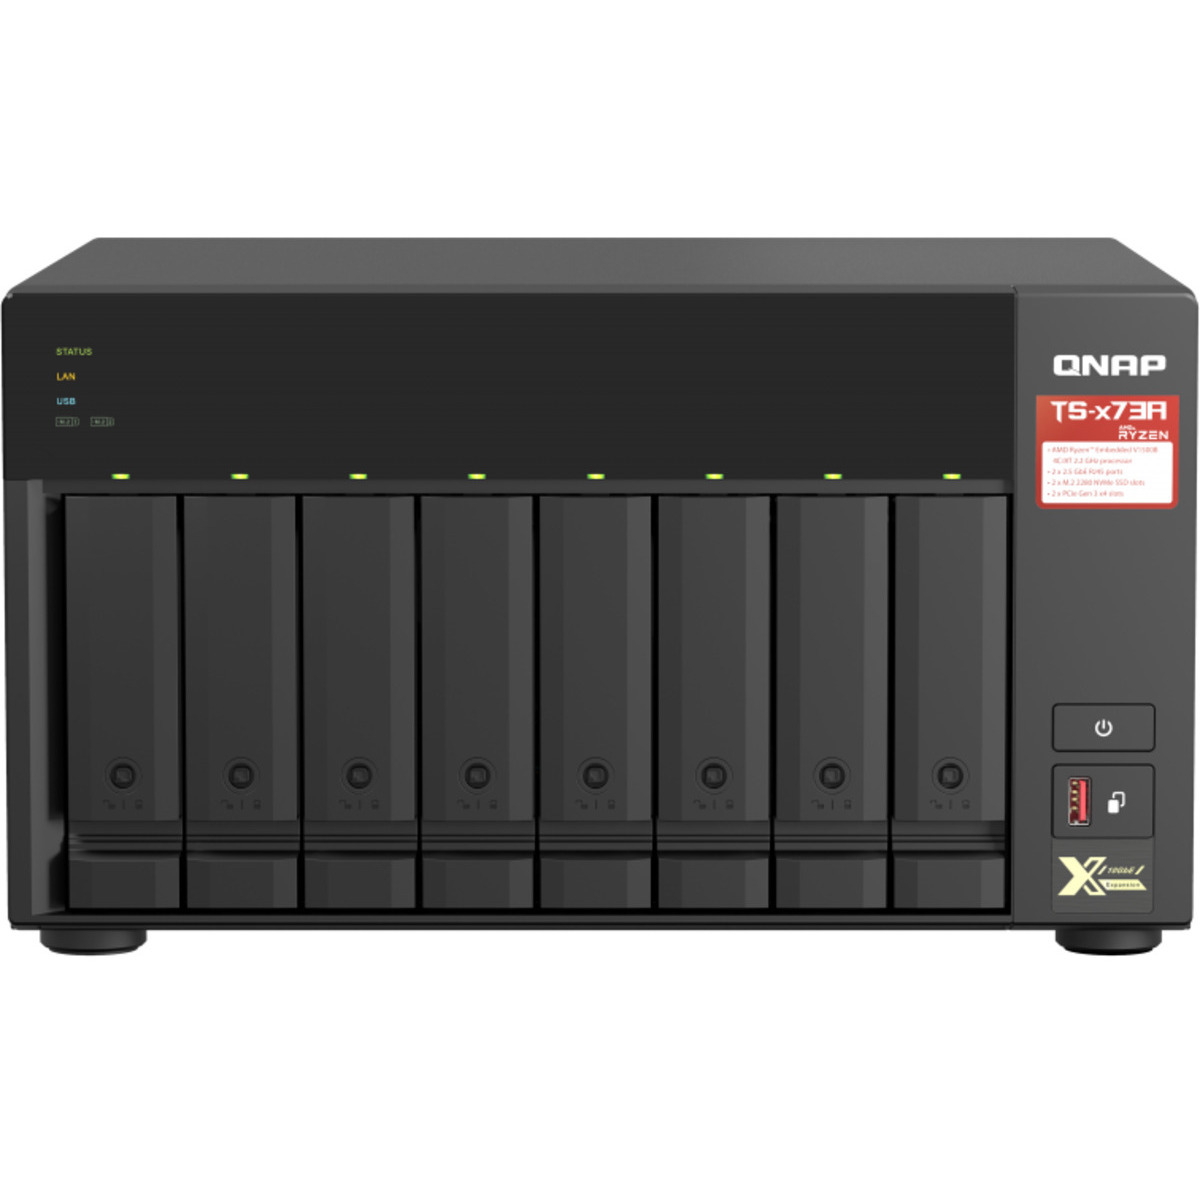 QNAP TS-873A 140tb 8-Bay Desktop Multimedia / Power User / Business NAS - Network Attached Storage Device 7x20tb Seagate IronWolf Pro ST20000NT001 3.5 7200rpm SATA 6Gb/s HDD NAS Class Drives Installed - Burn-In Tested TS-873A